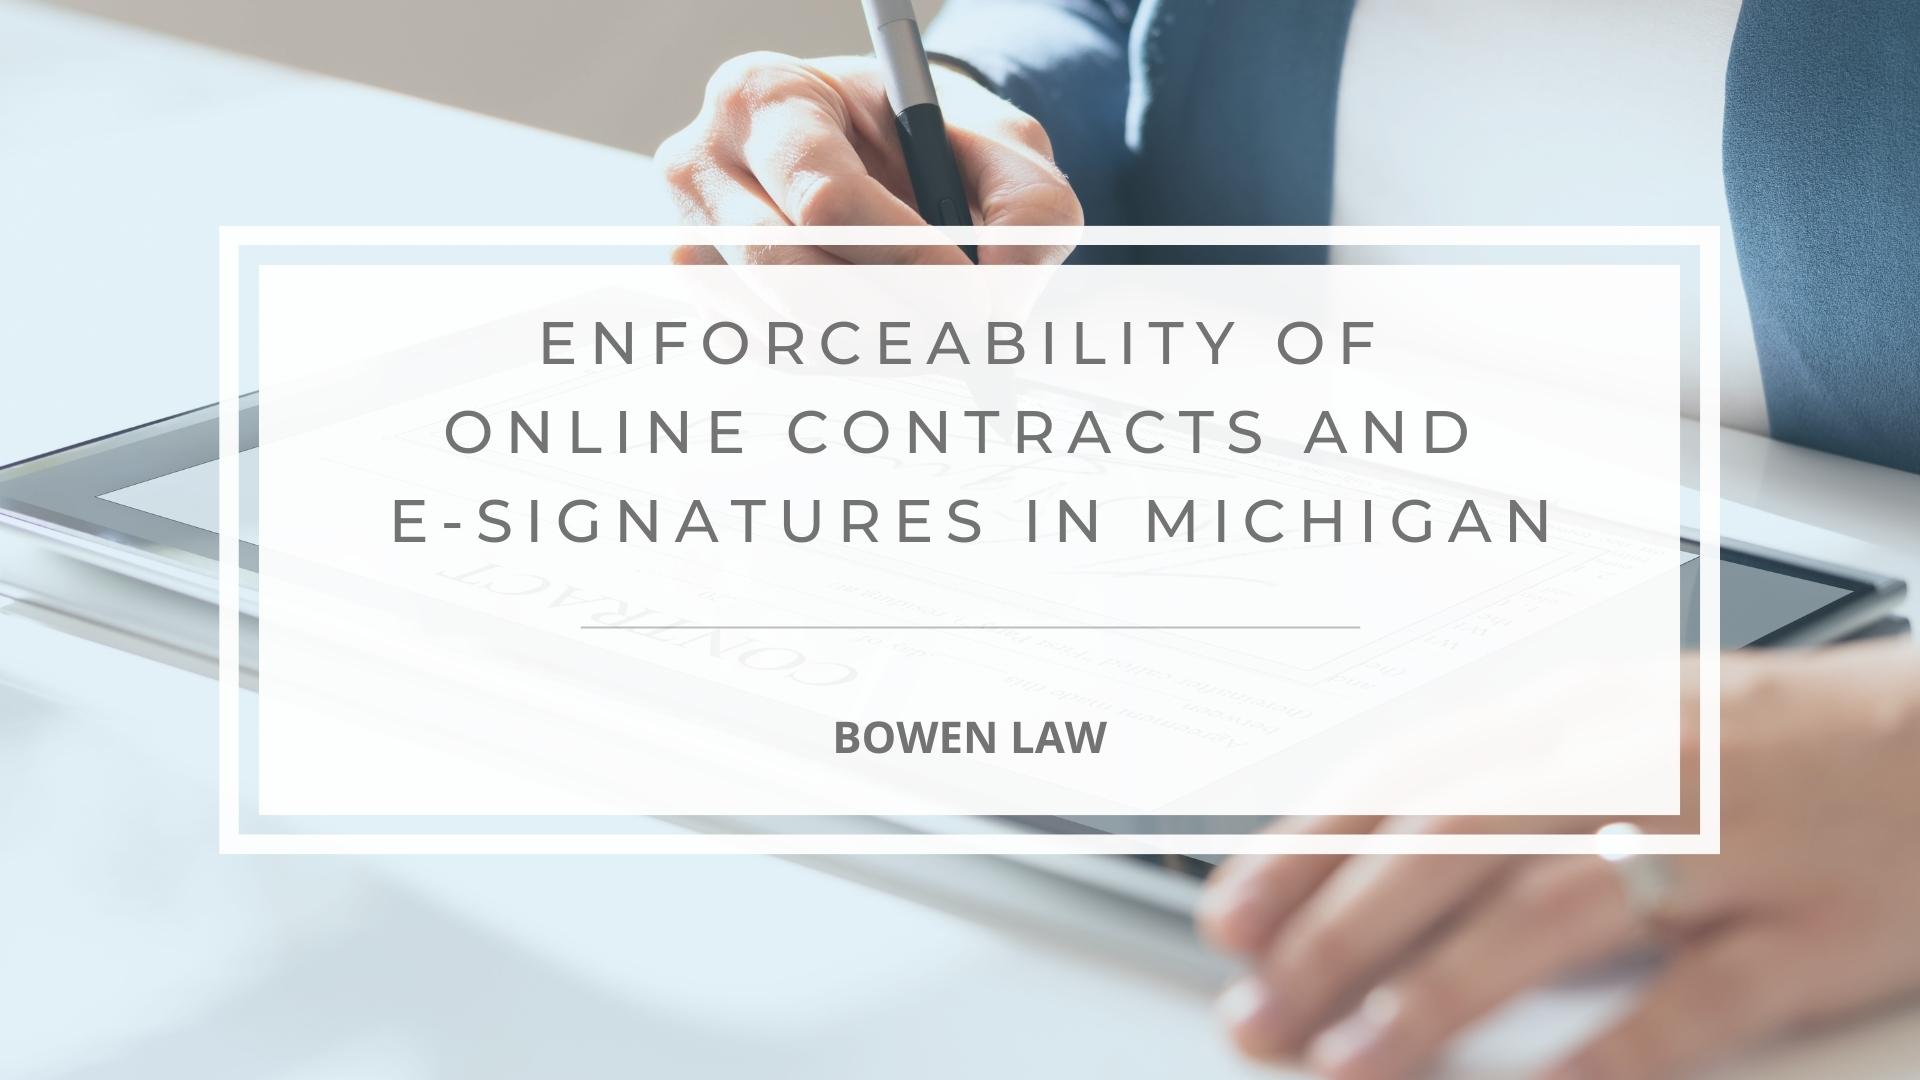 Featured image of enforceability of online contracts and e-signatures in Michigan